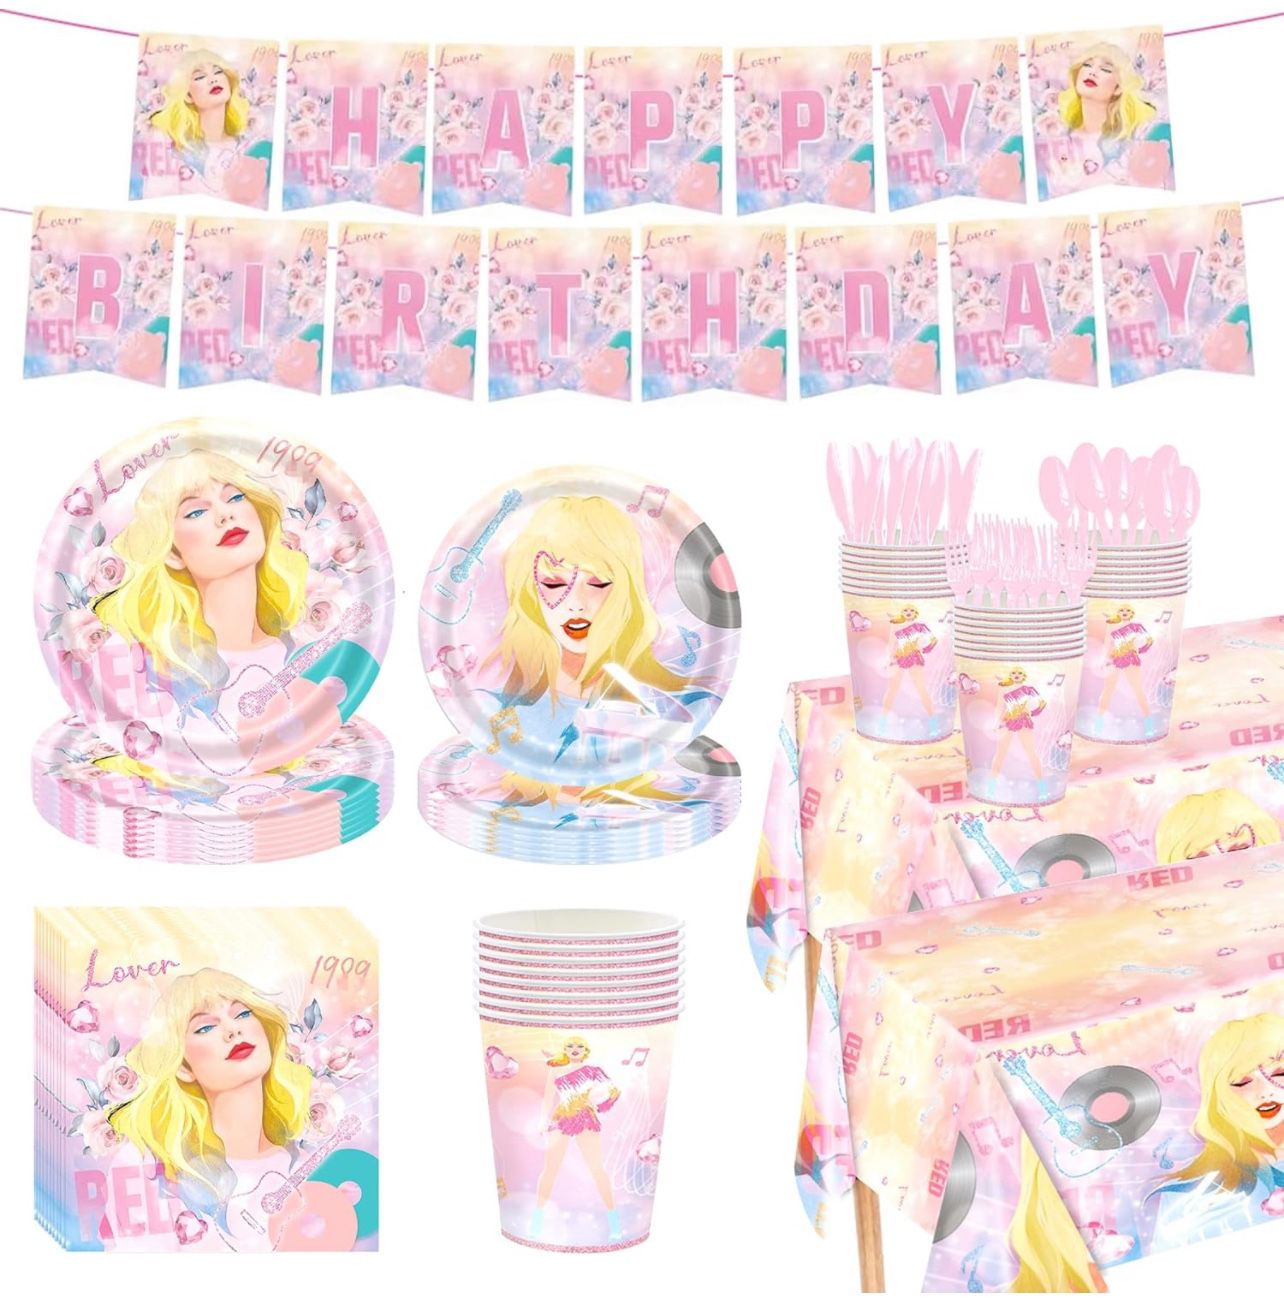 171pcs Birthday Party Supplies Singer Paper Plates Napkins Cups Plastic Tablecloths Music Singer Tableware Set Birthday Party Decorations Serves 24 Gu